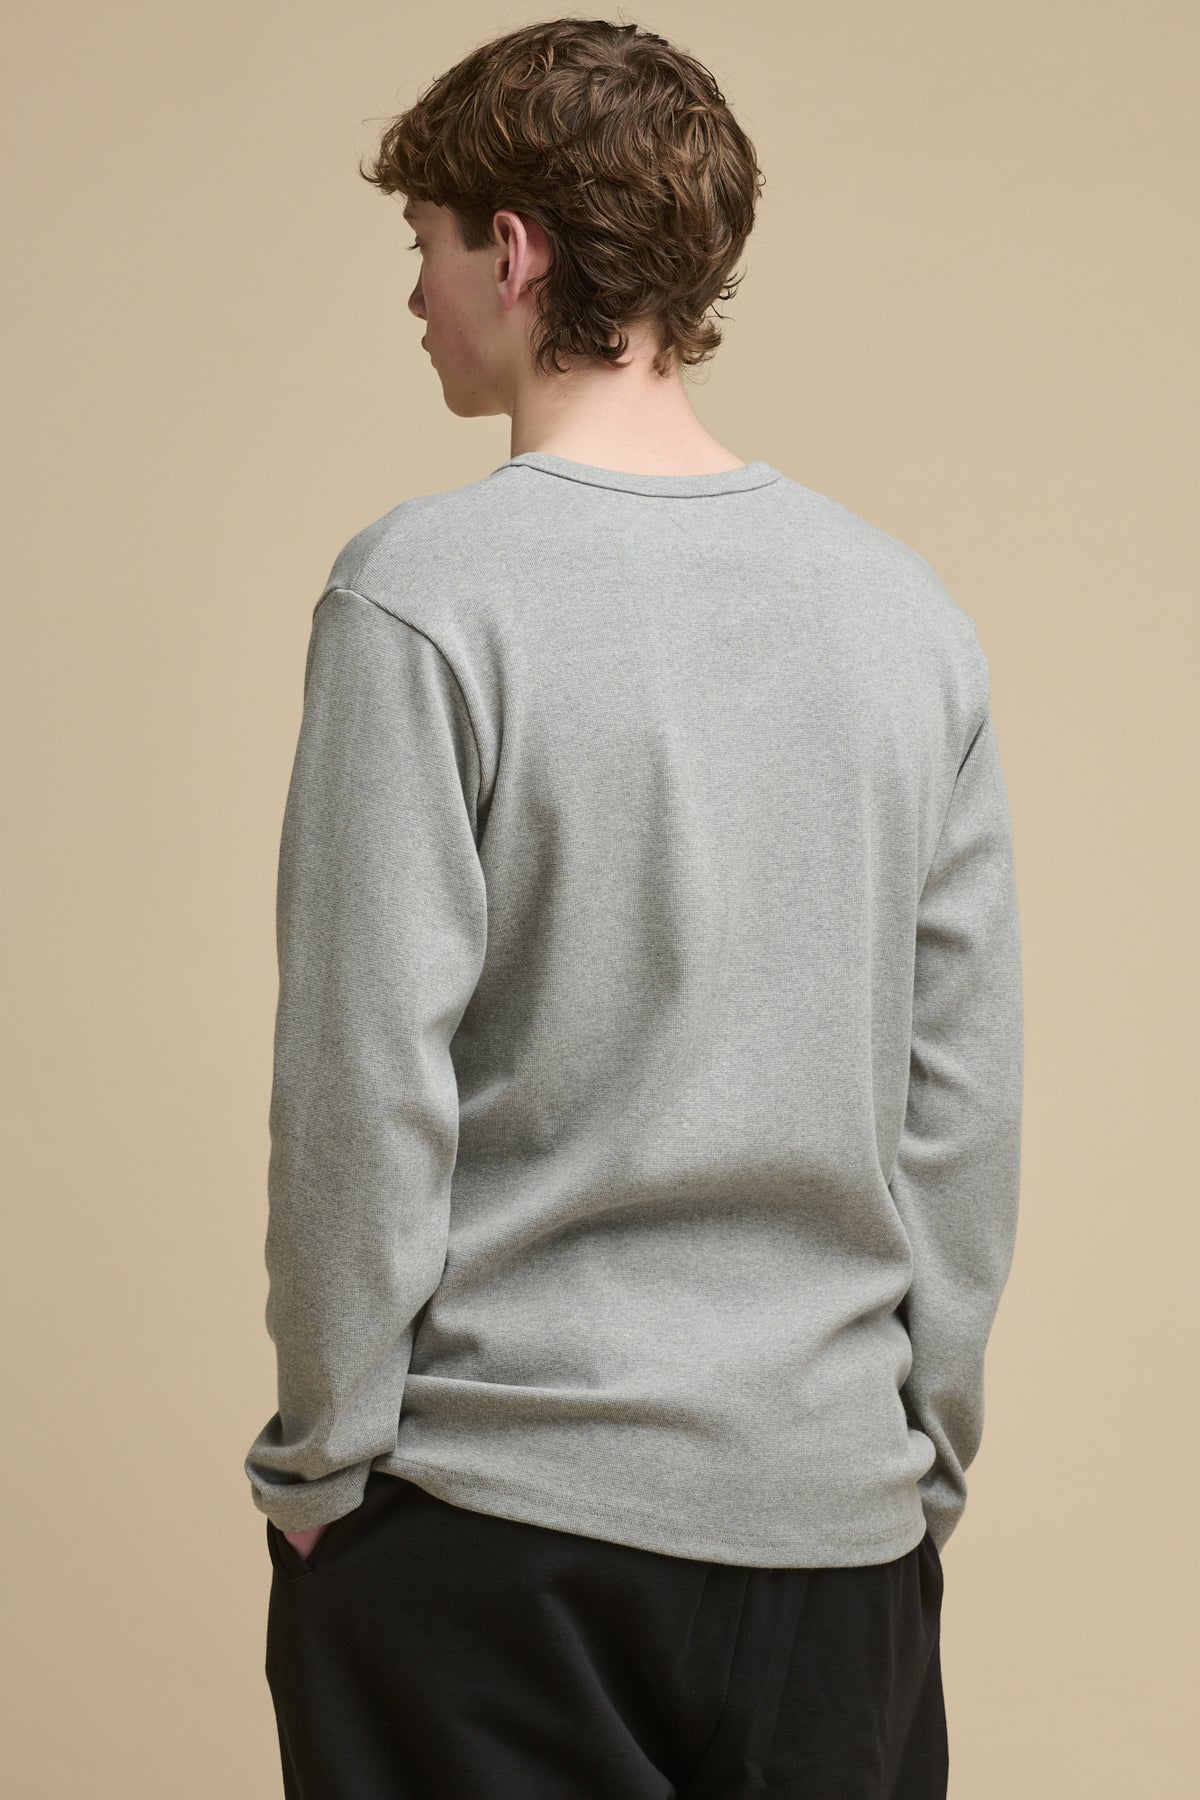 
            Thigh up image of the back of male wearing long sleeve Henley top in grey marl paired with black sweatpants